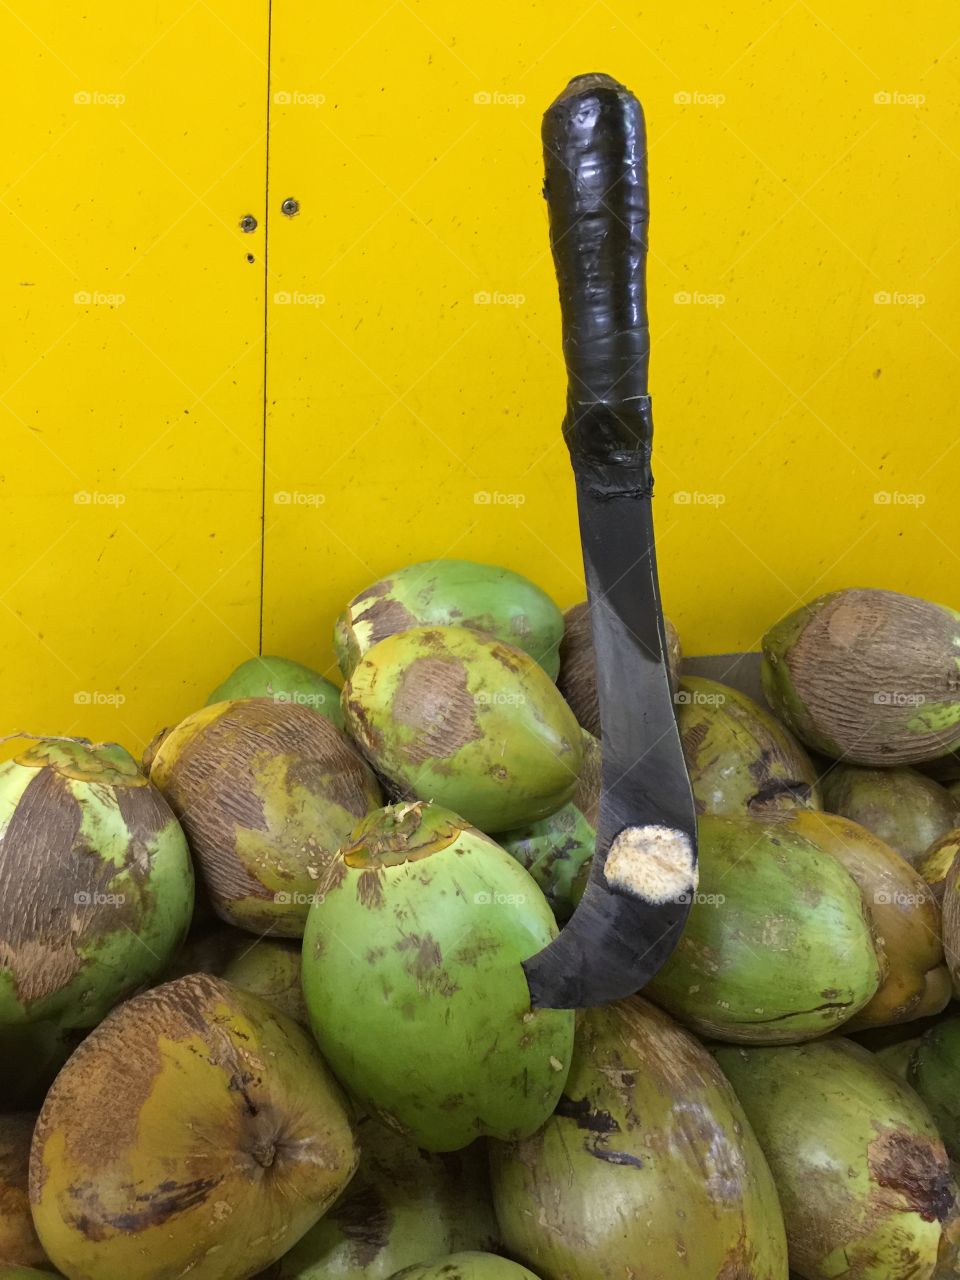 Tender coconut with knife